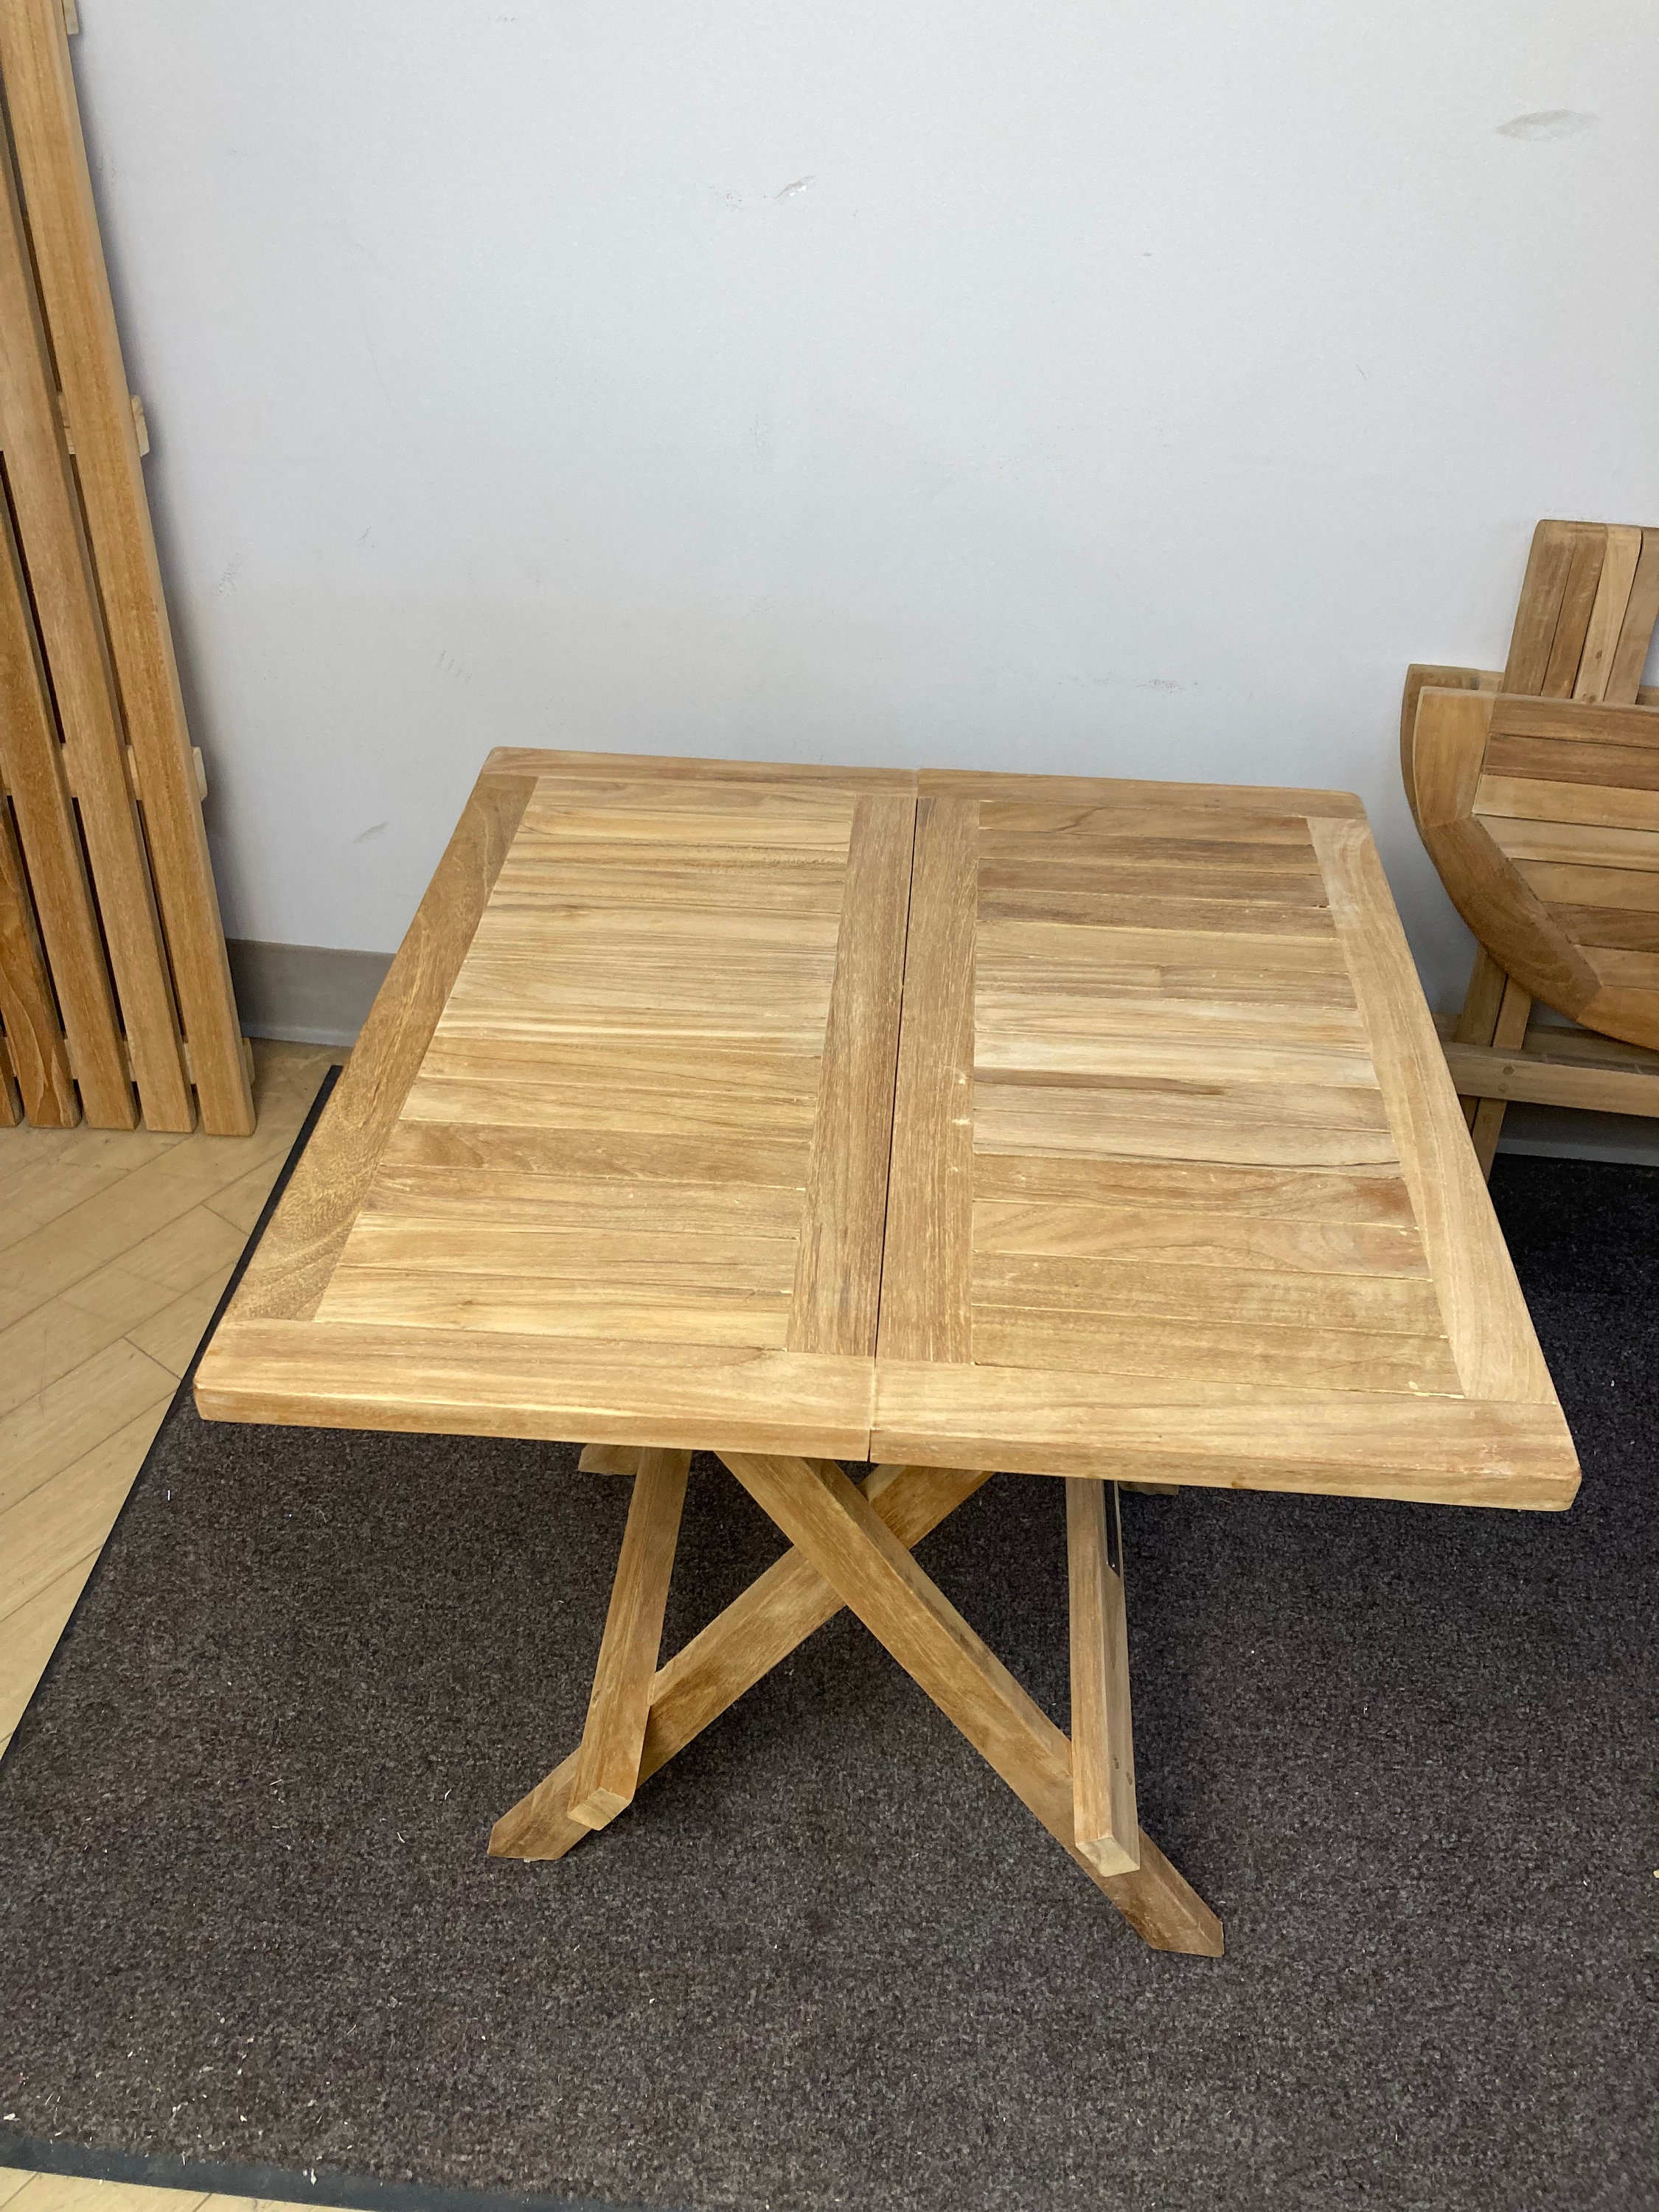 Handcrafted Folding Teak Table Top With Wing Support 680/340x500,  680/340x750,680/340x1000mm Marine Boat RV 